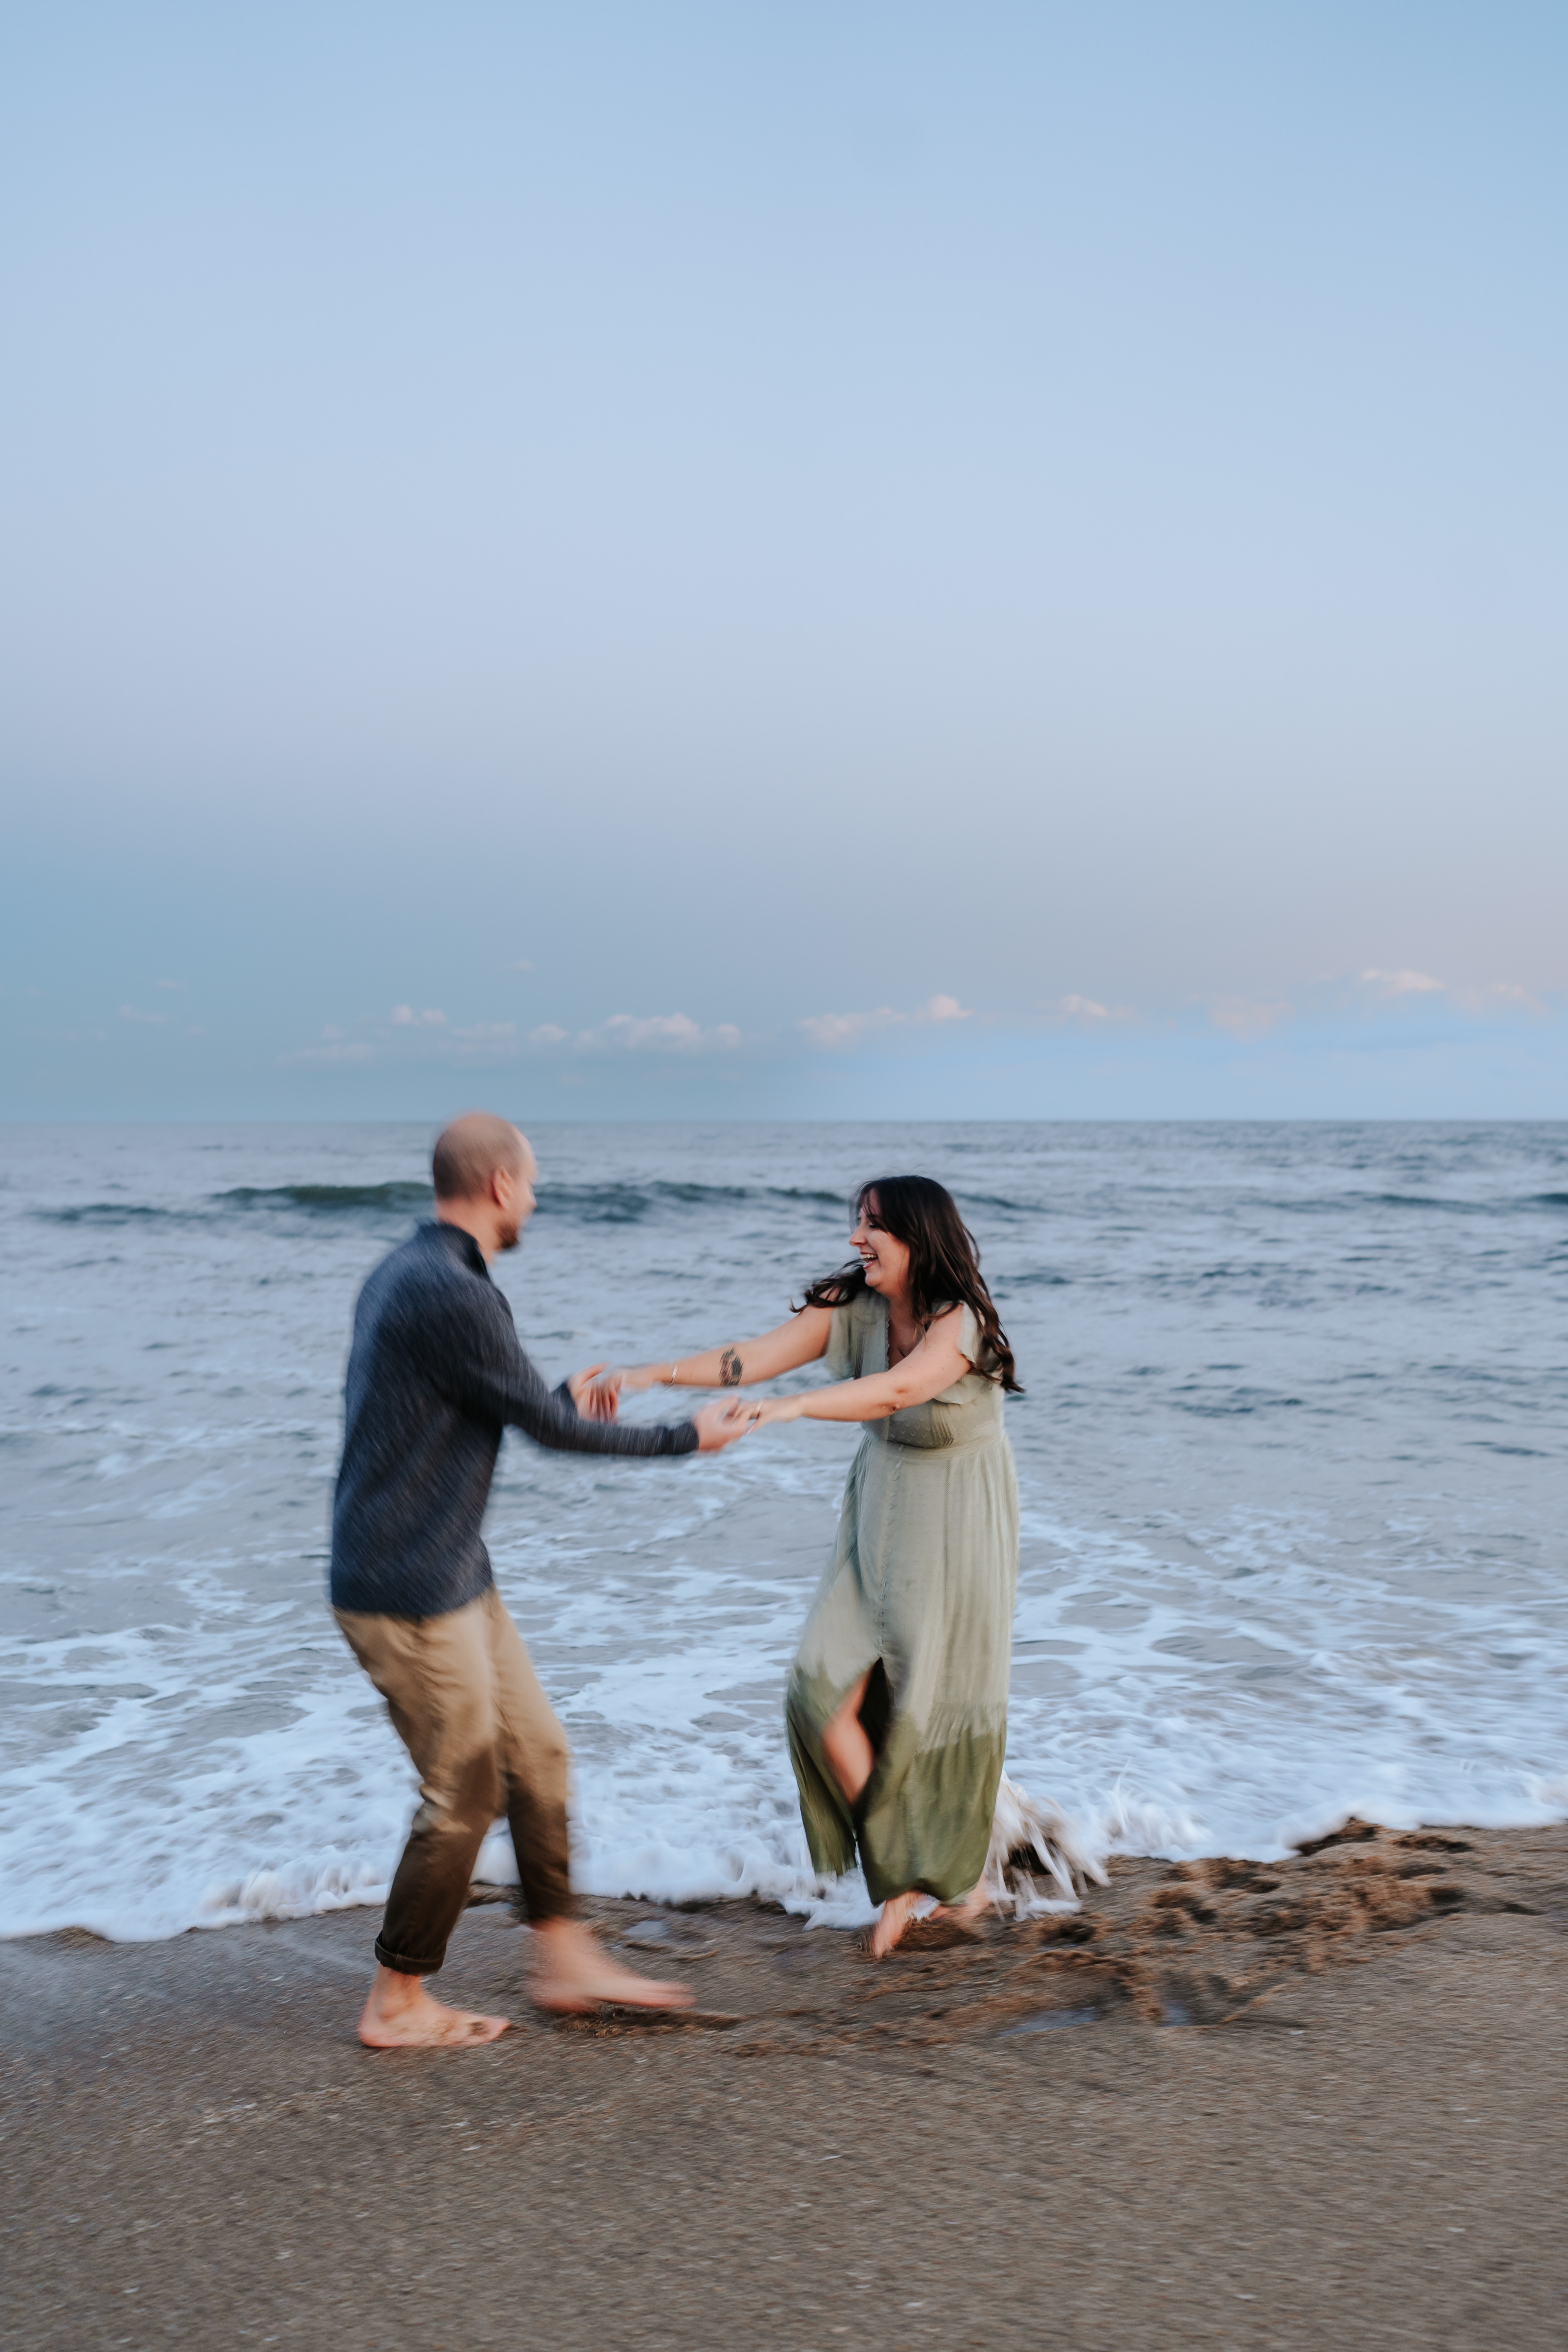 A couple at Asbury Park Beach during their engagement session with Maryland Wedding Photographer capturing the serene ocean backdrop.